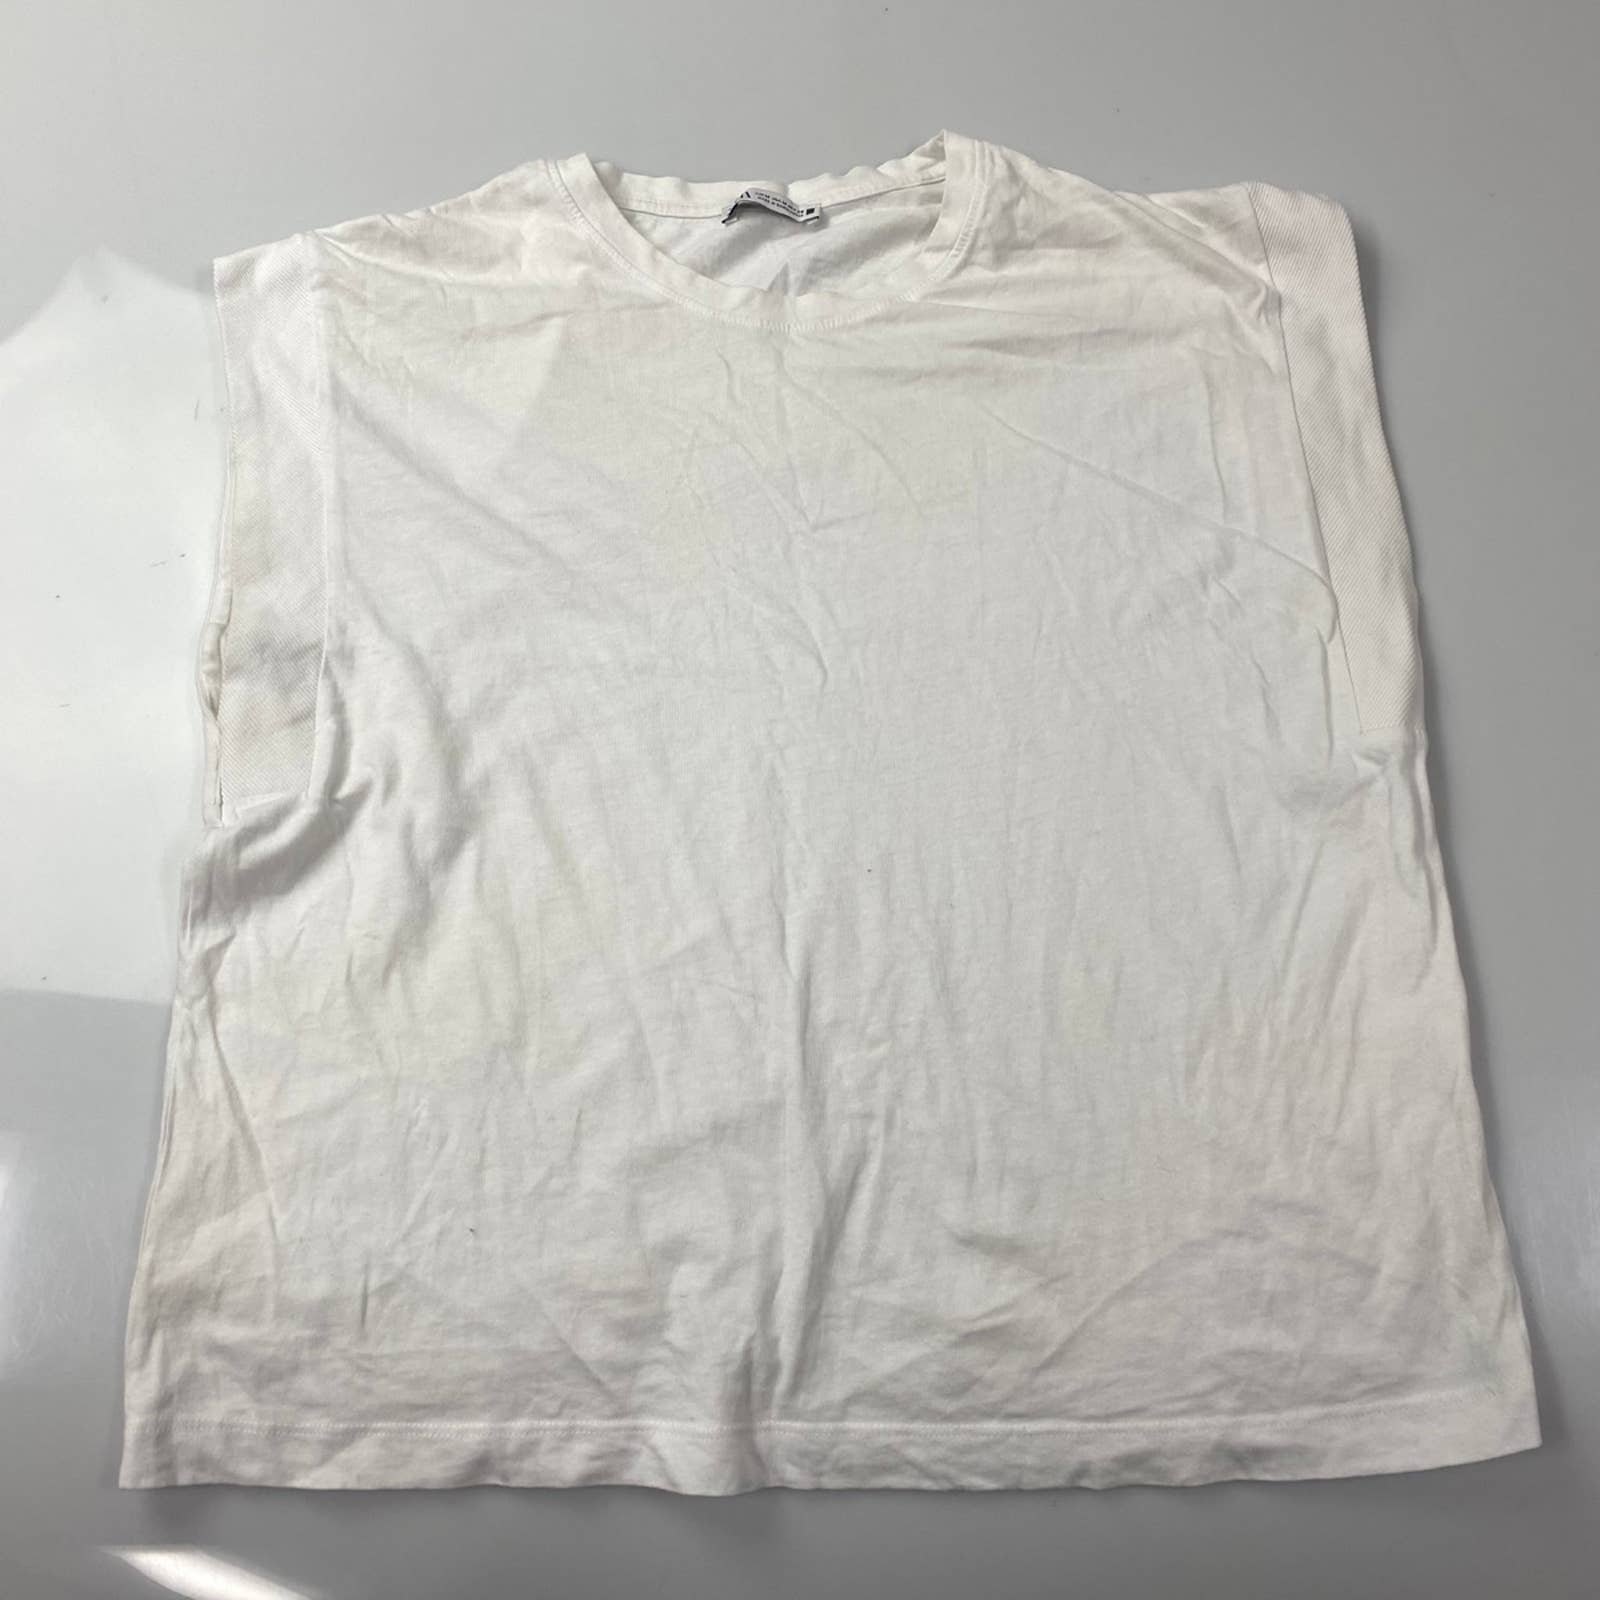 Promotions  ZARA white muscle t-shirt GiOokKC3N Everyda